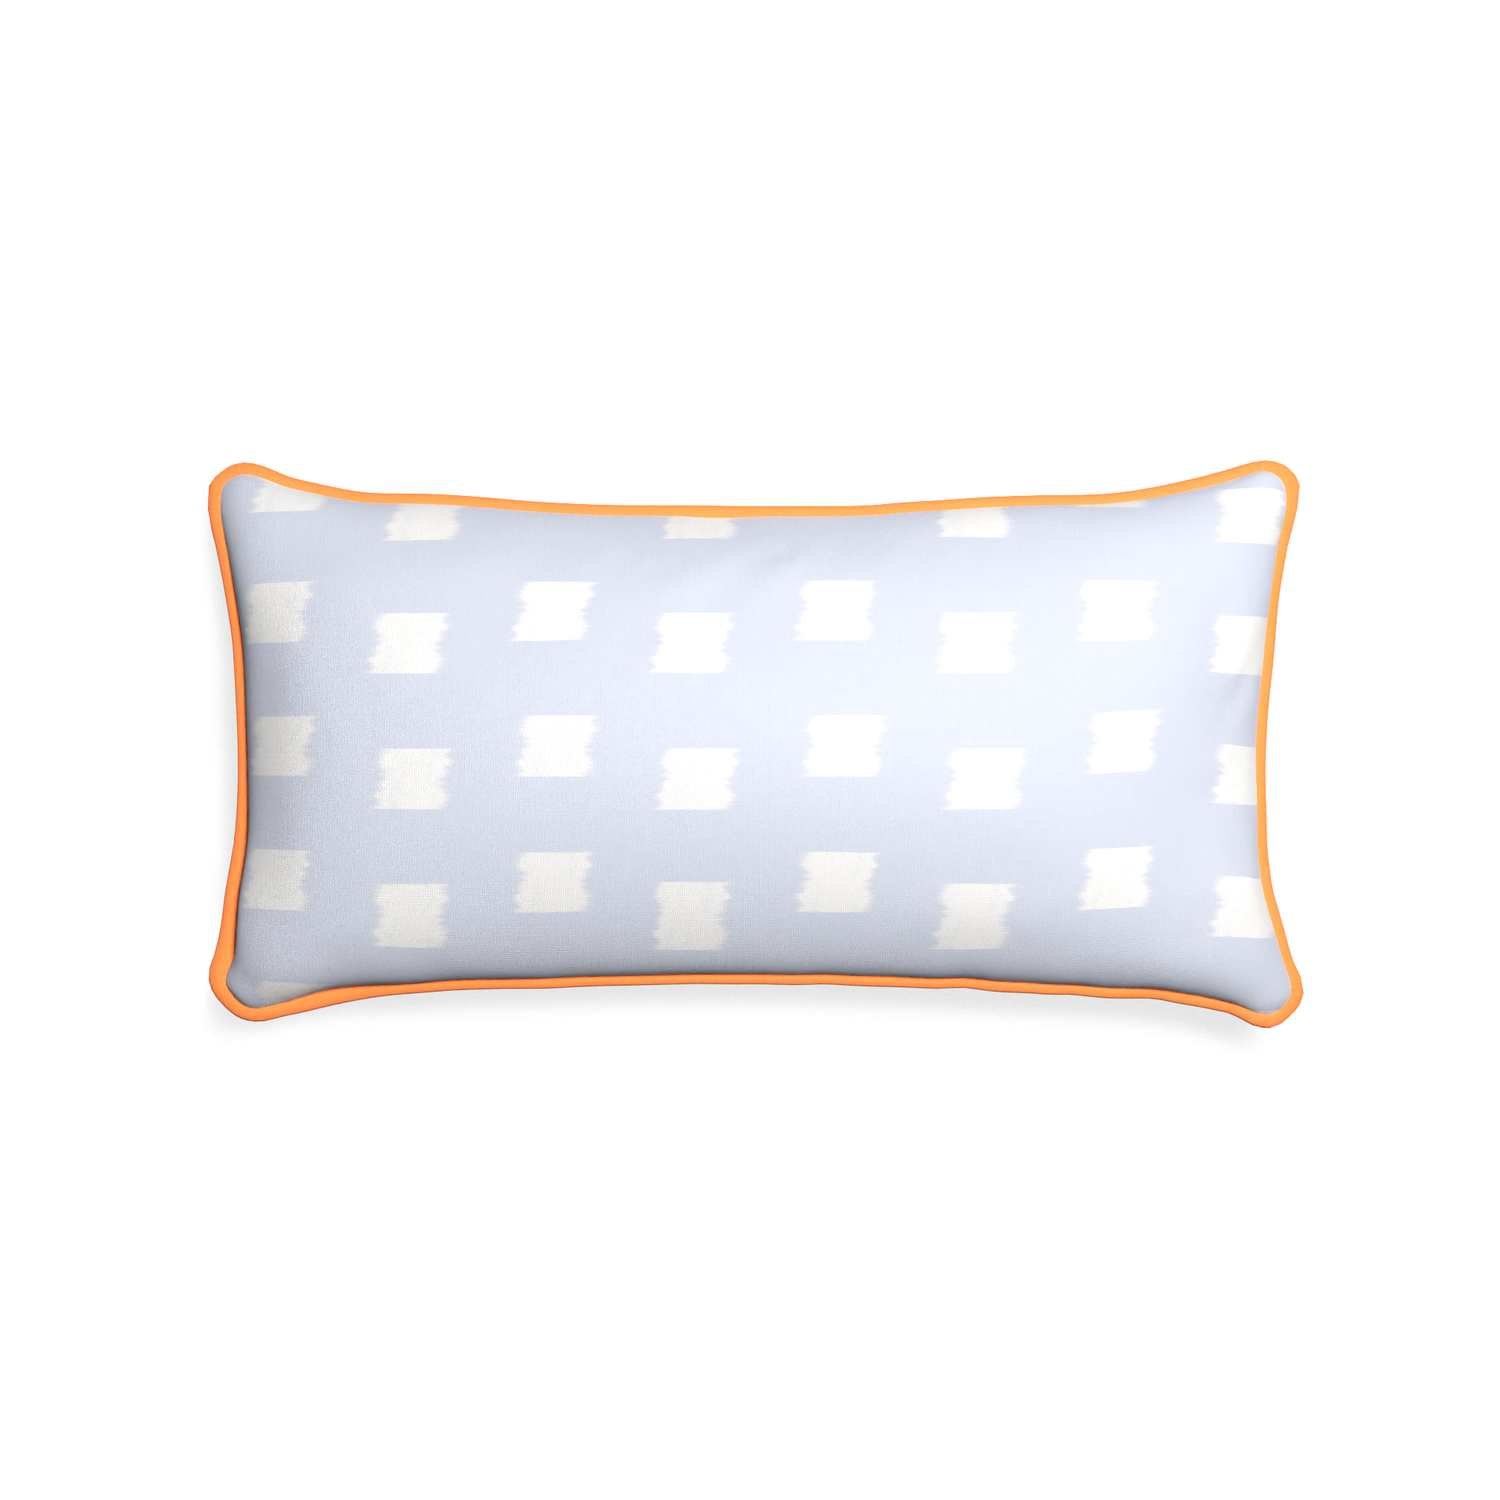 Midi-lumbar denton custom sky blue patternpillow with clementine piping on white background